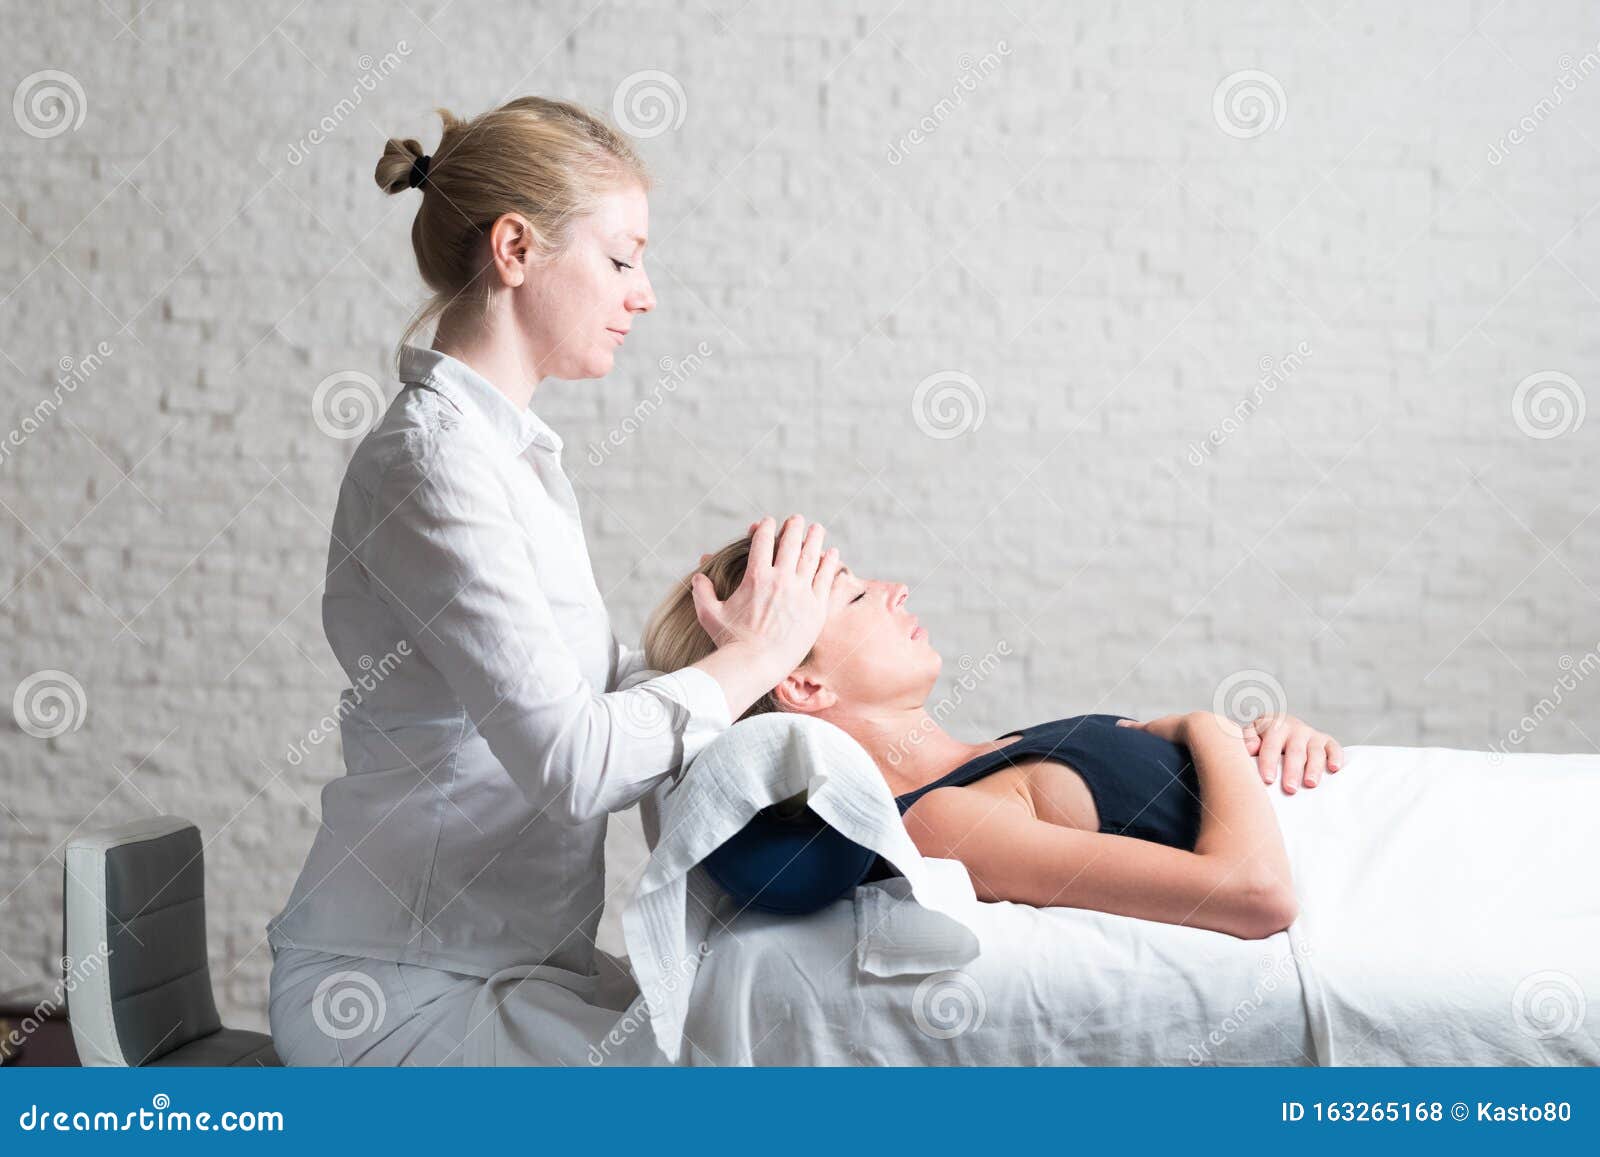 Professional Female Masseur Giving Relaxing Massage Treatment To Young Female Client Hands Of